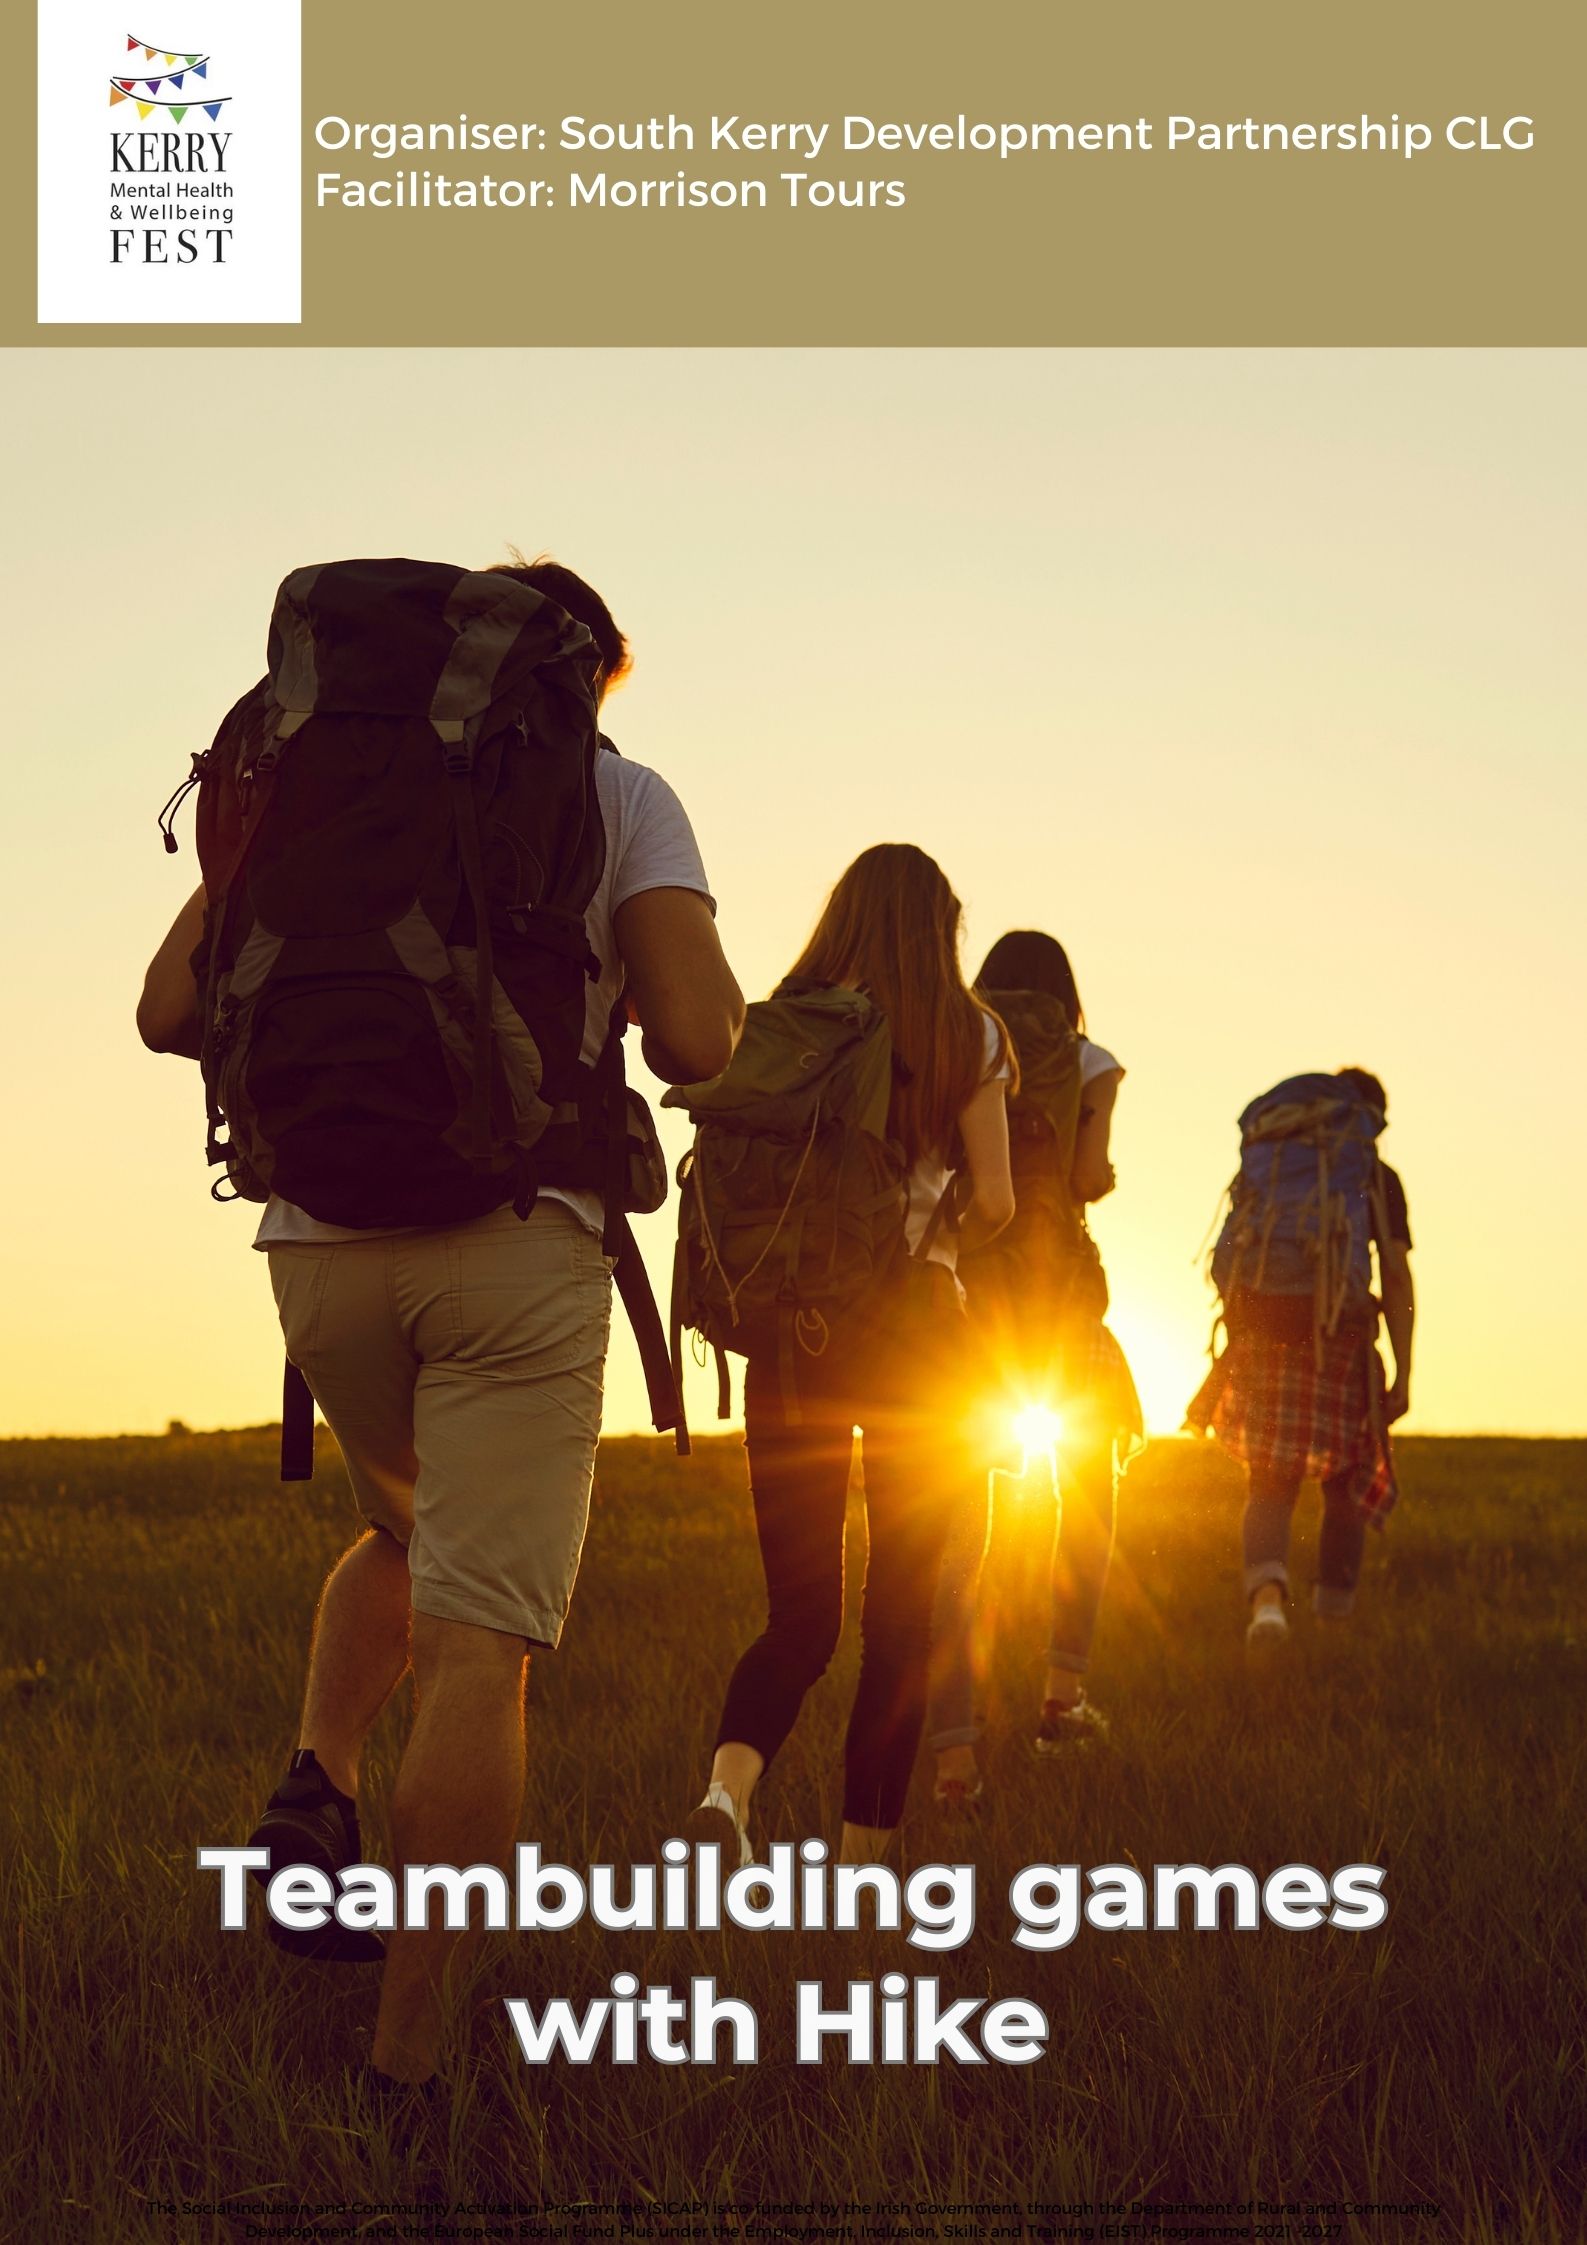 Team Building Games with Hike, Killarney event at Kerry Mental Health & Wellbeing Fest 2023